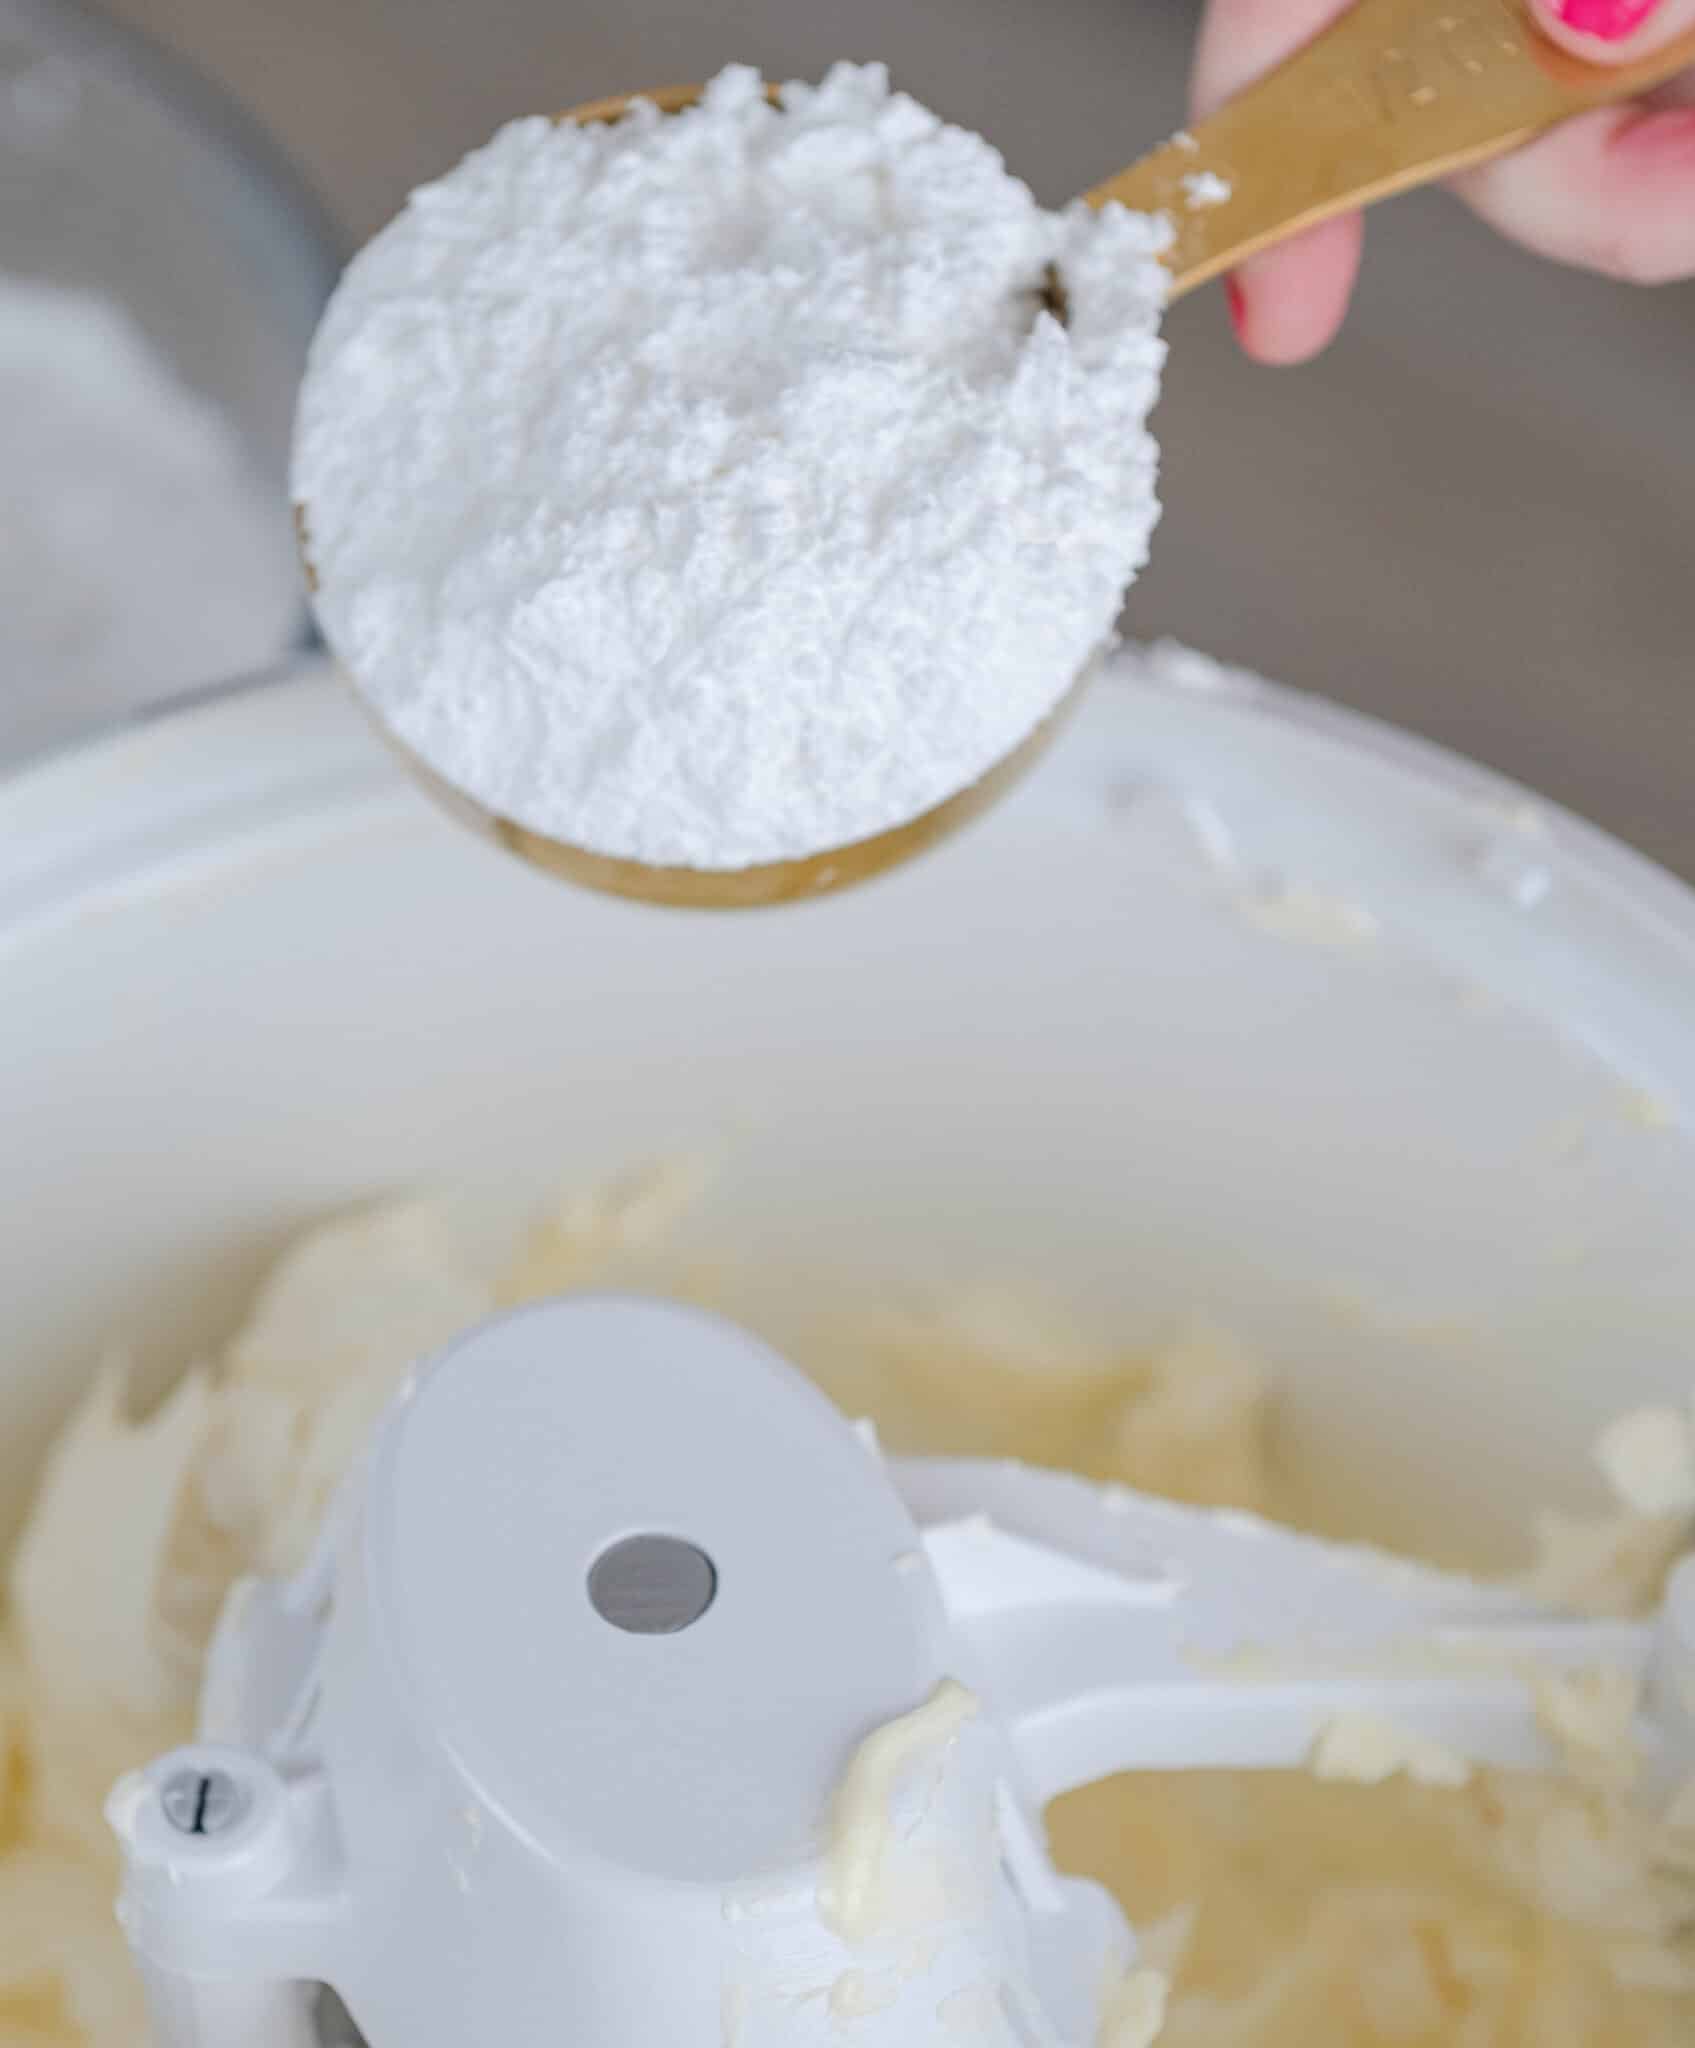 hand adding a cup of powdered sugar into a stand mixer bowl